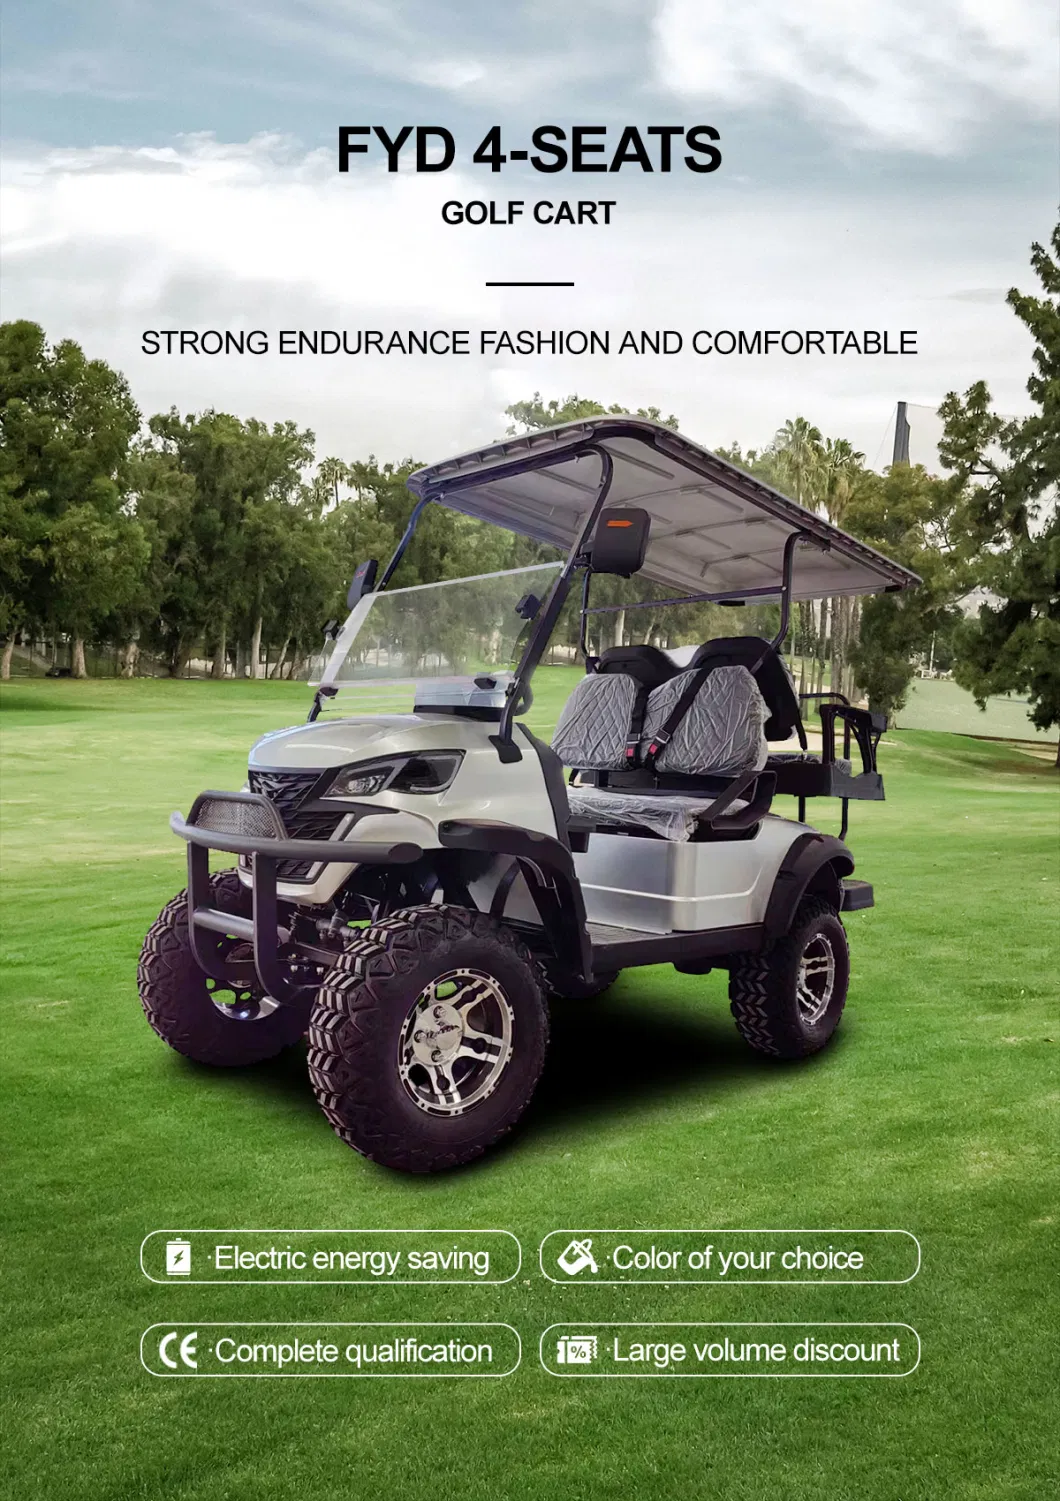 Cheap 2+2 Seater Buggy Golf Course Airport Mobility Scooter 4 Wheel Drive Electric Silver Golf Cart off-Road Vehicle for Sale